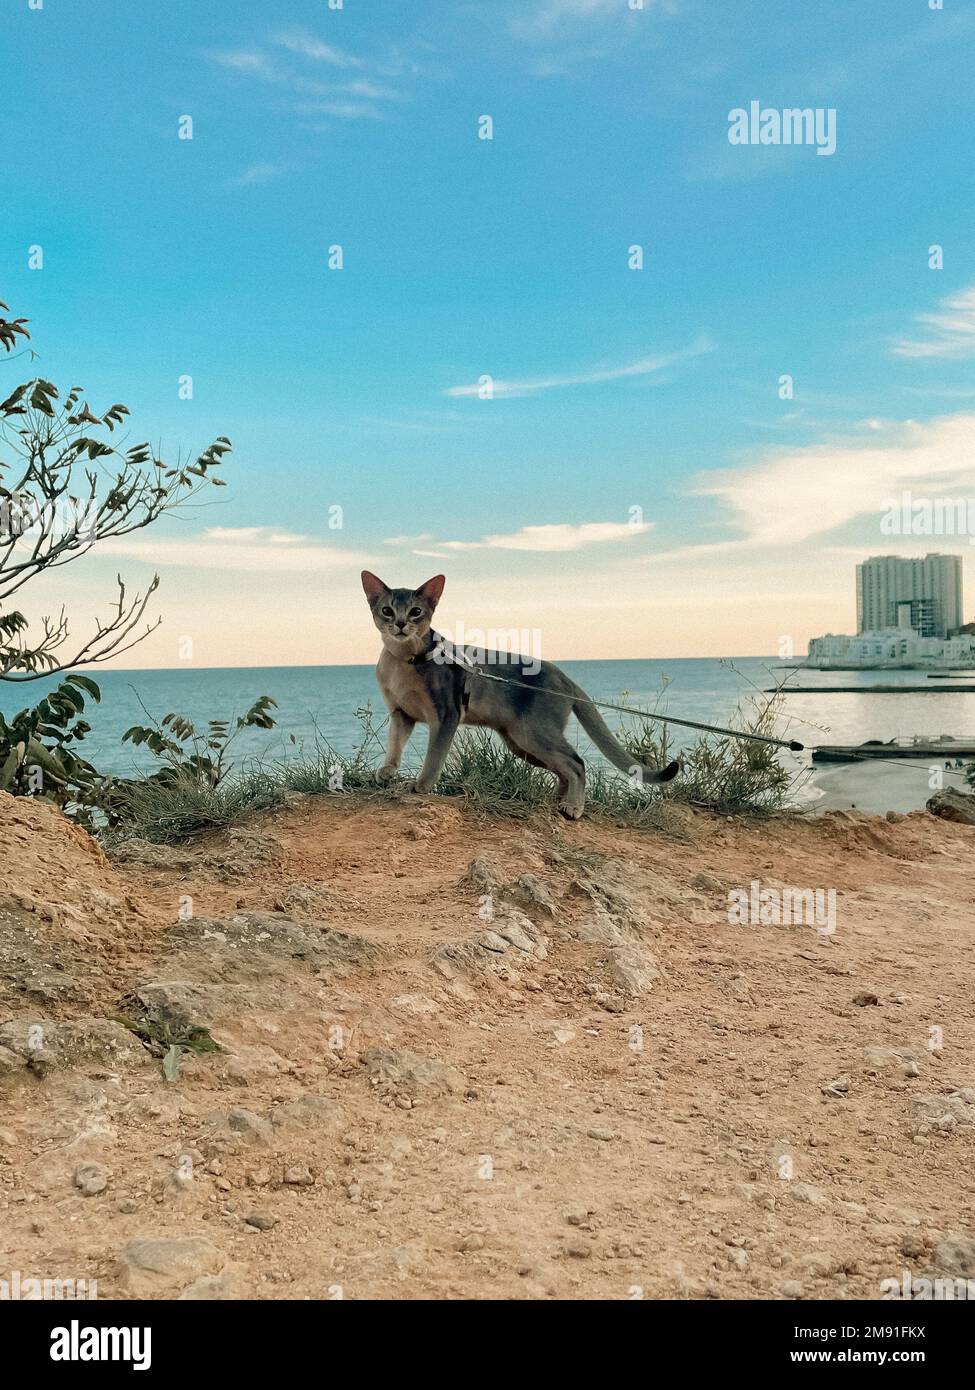 A vertical shot of a cat on a leash with a seascape in the background Stock Photo